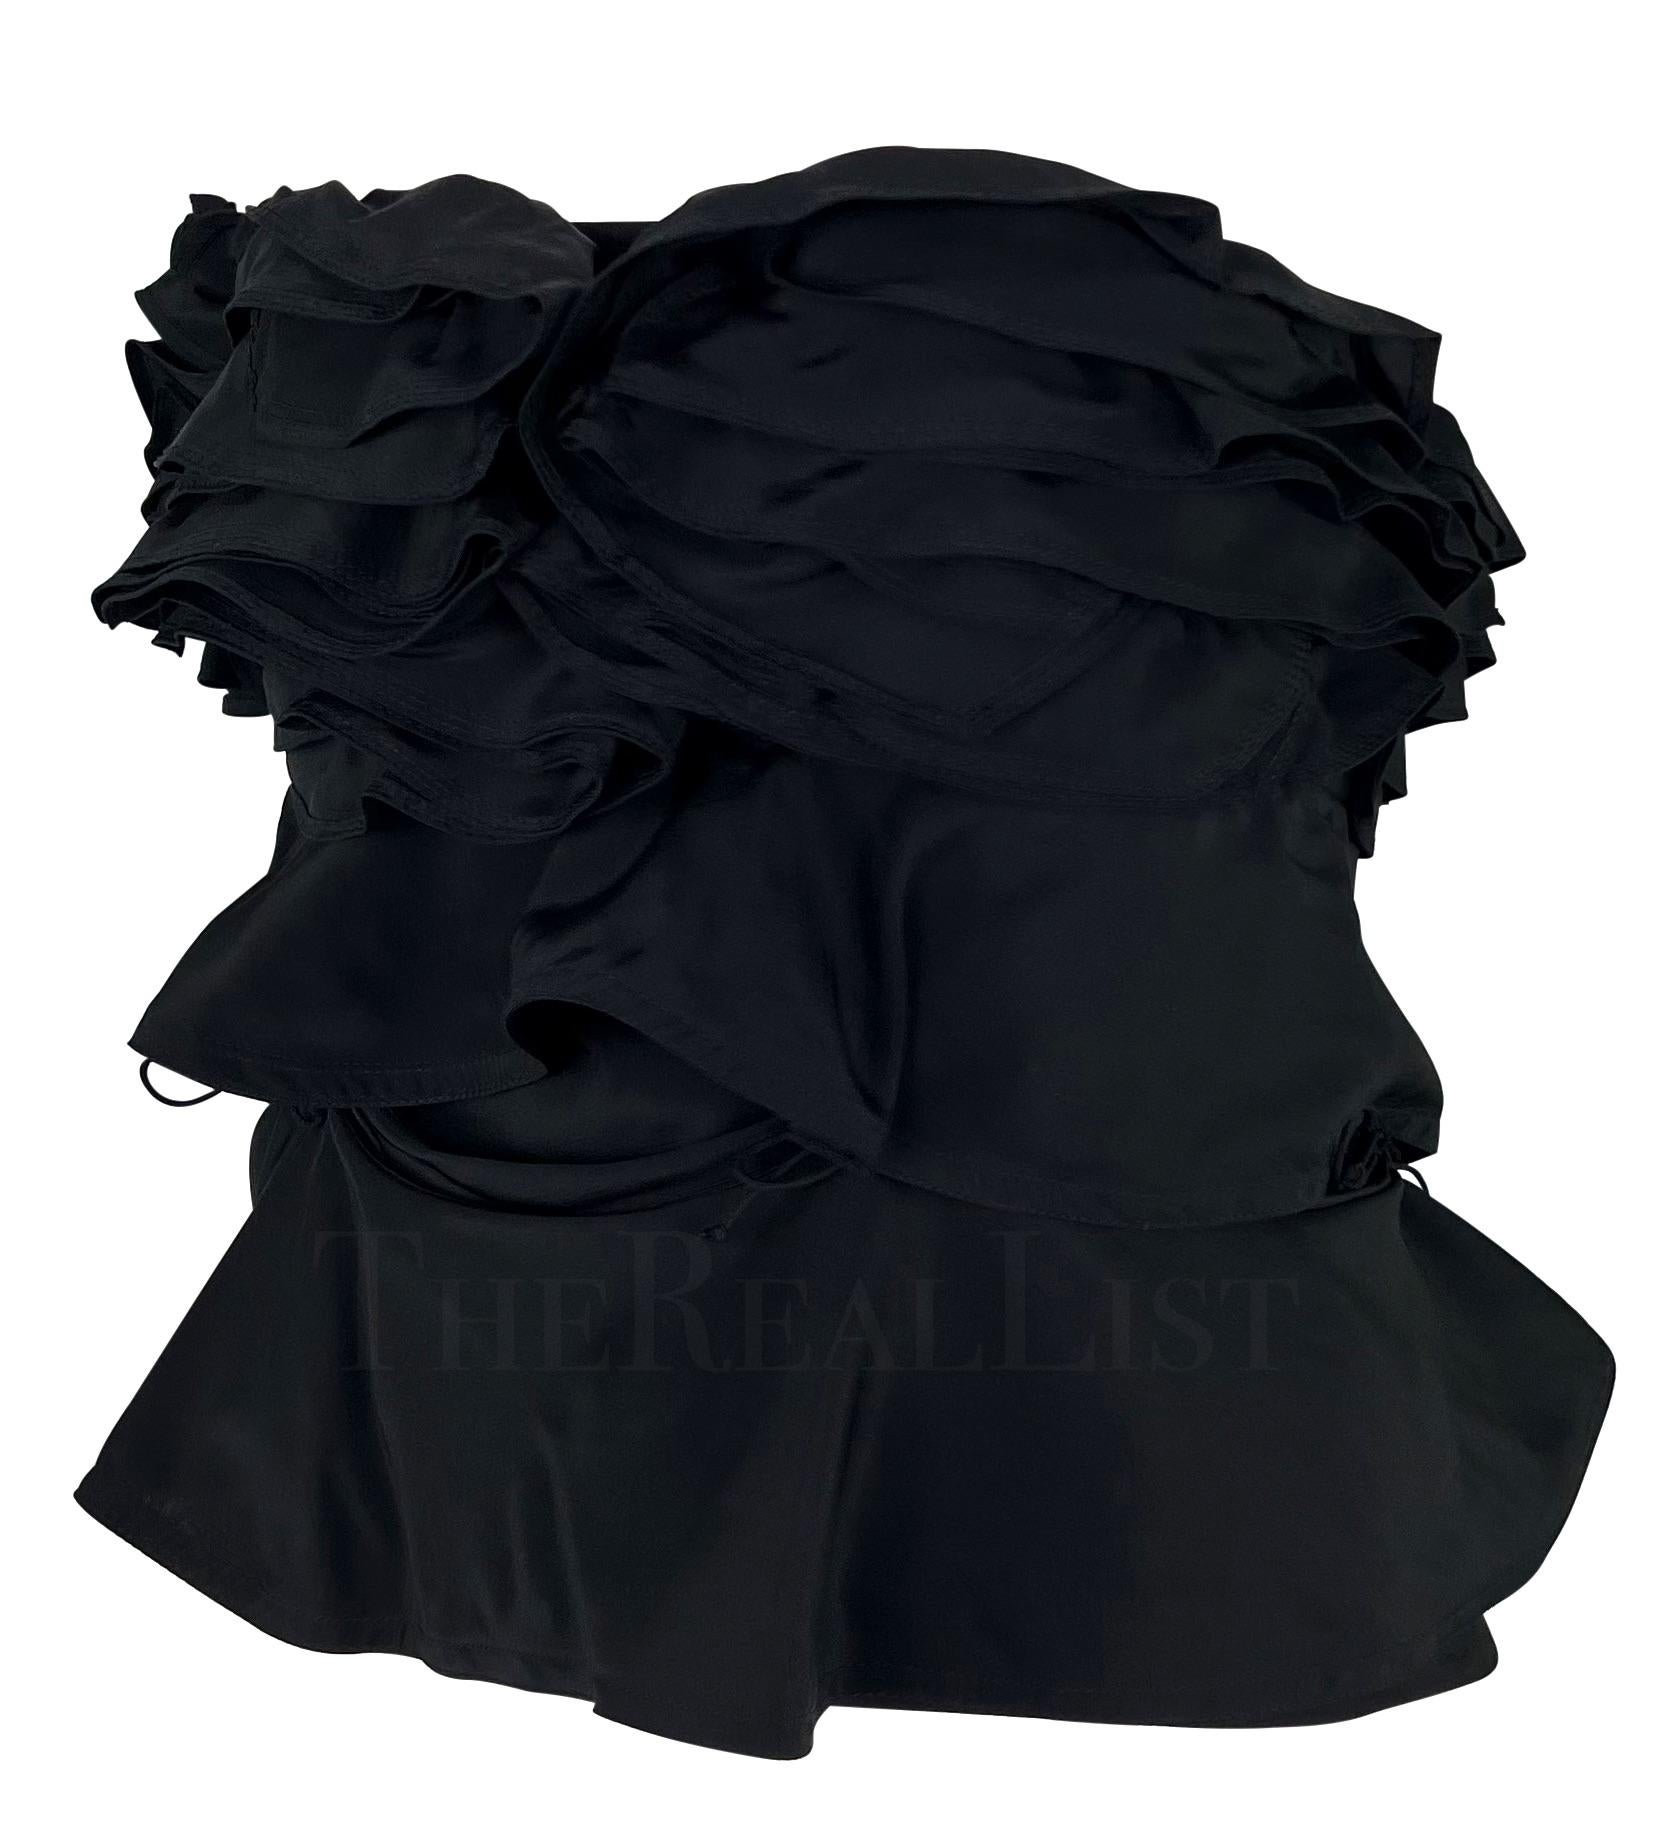 Women's NWT F/W 2003 Yves Saint Laurent by Tom Ford Black Silk Ruffle Strapless Top For Sale